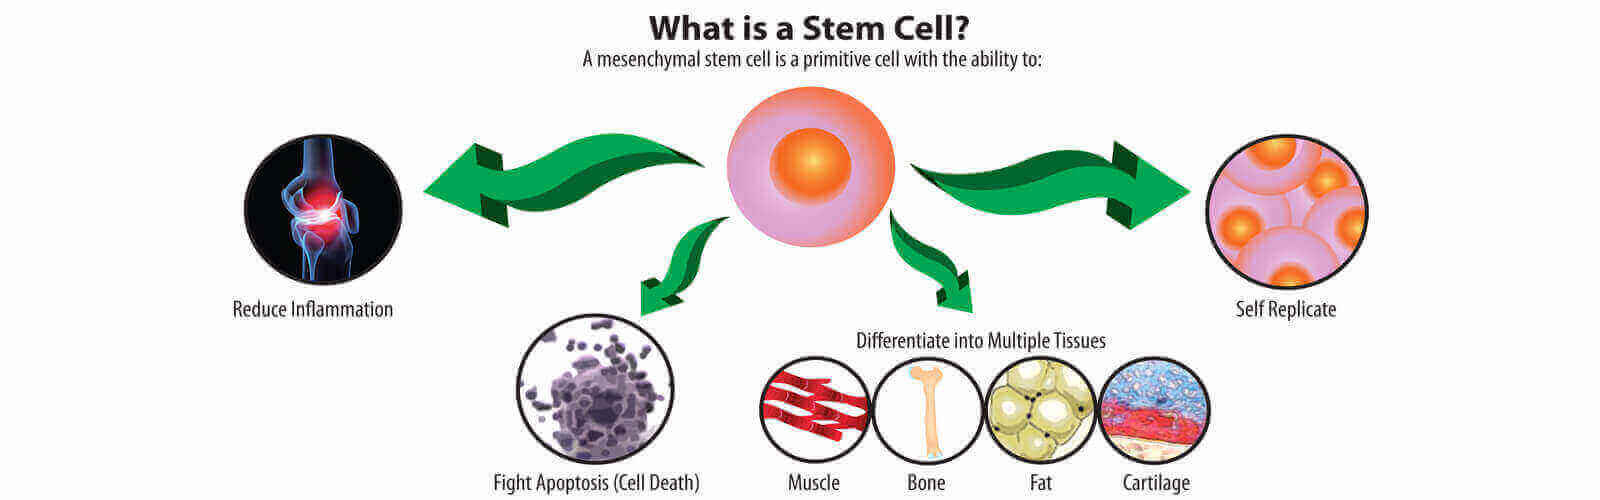 Stem Cell Treatment in Wilmington